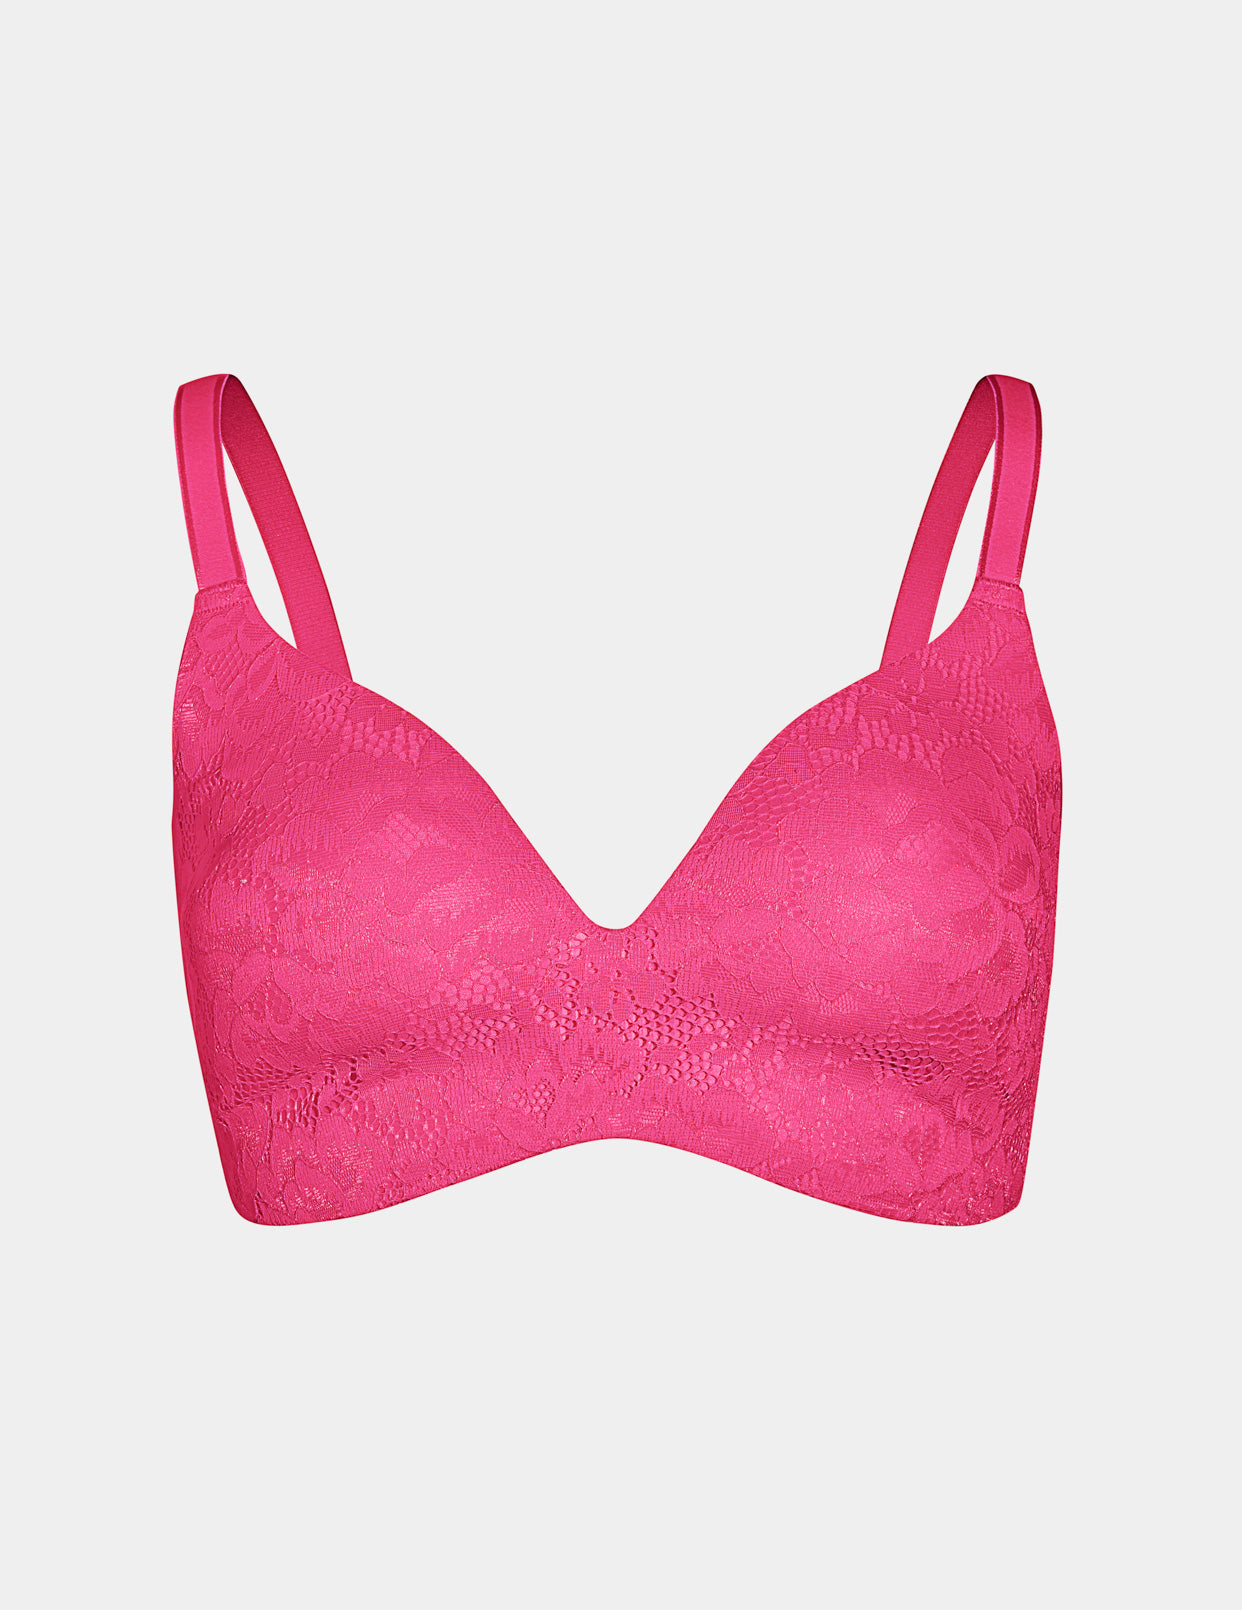 Victoria's Secret - The official bra of staying cool when it's hot. The  T-Shirt Bra, now in wireless.